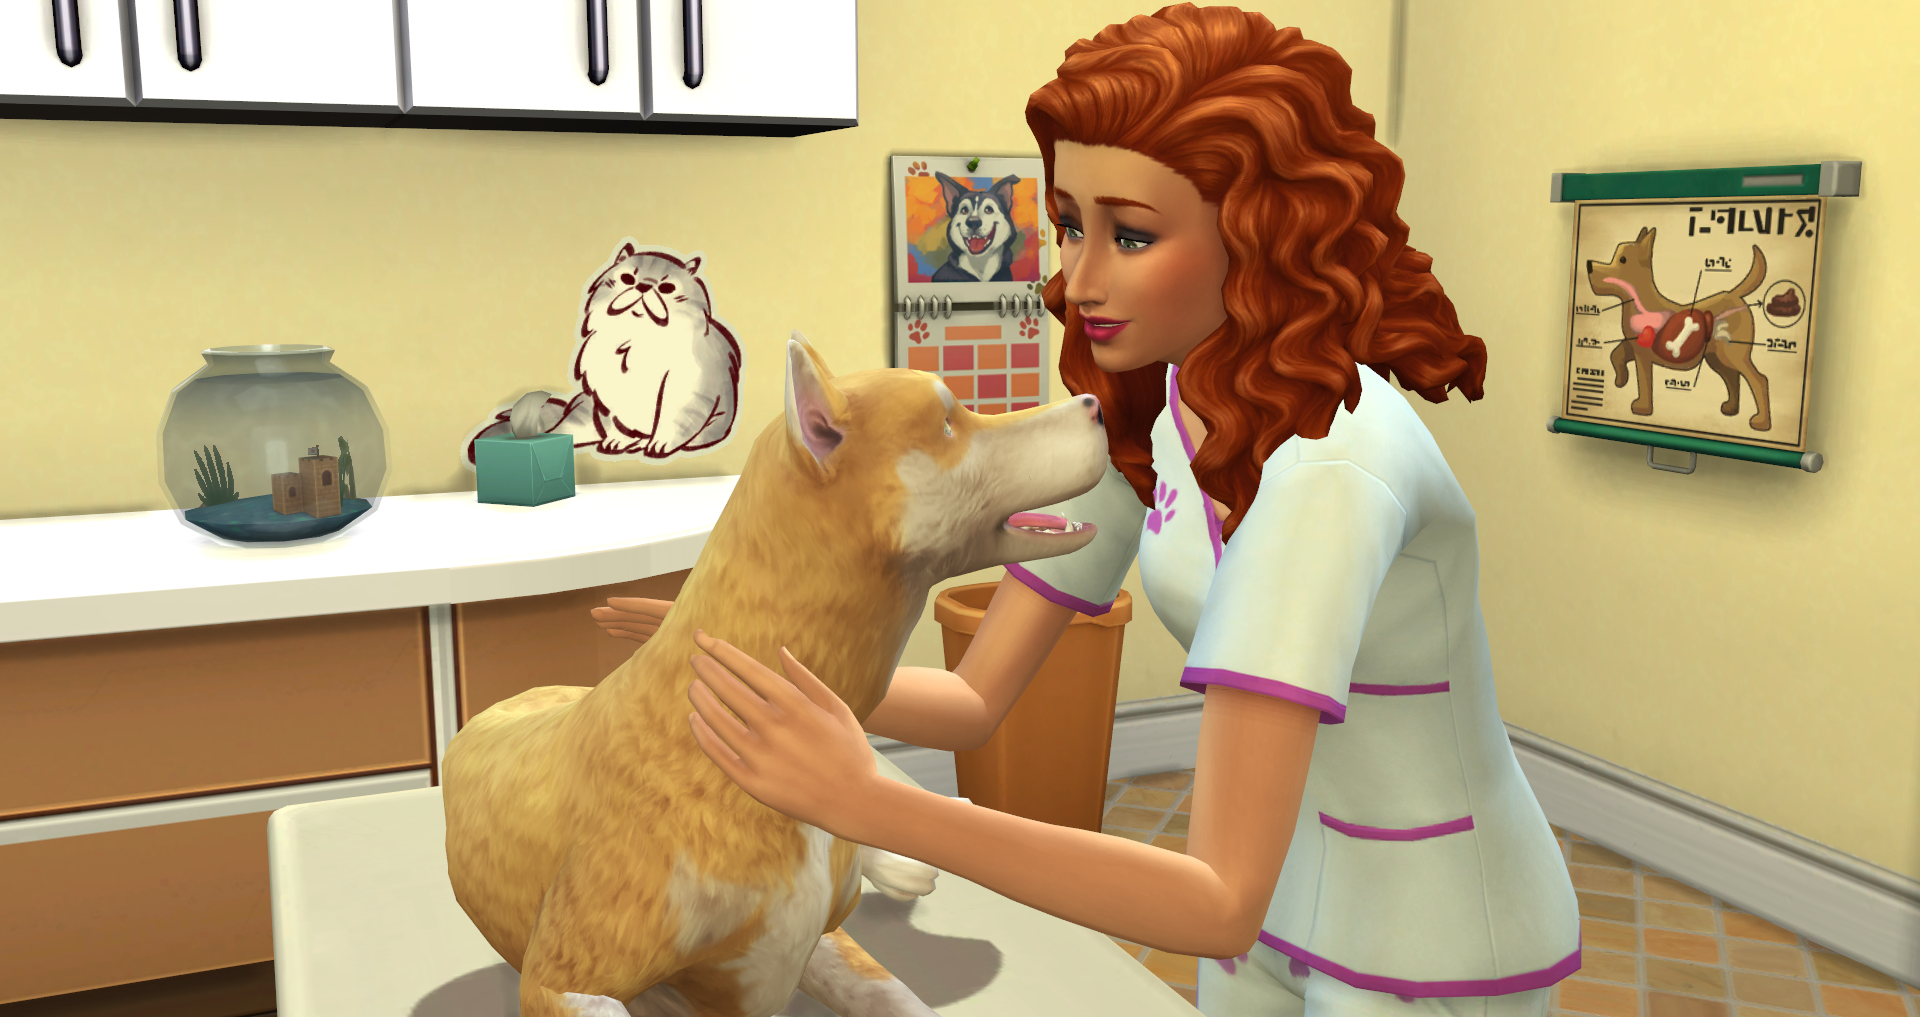 sims 4 pets mod download free